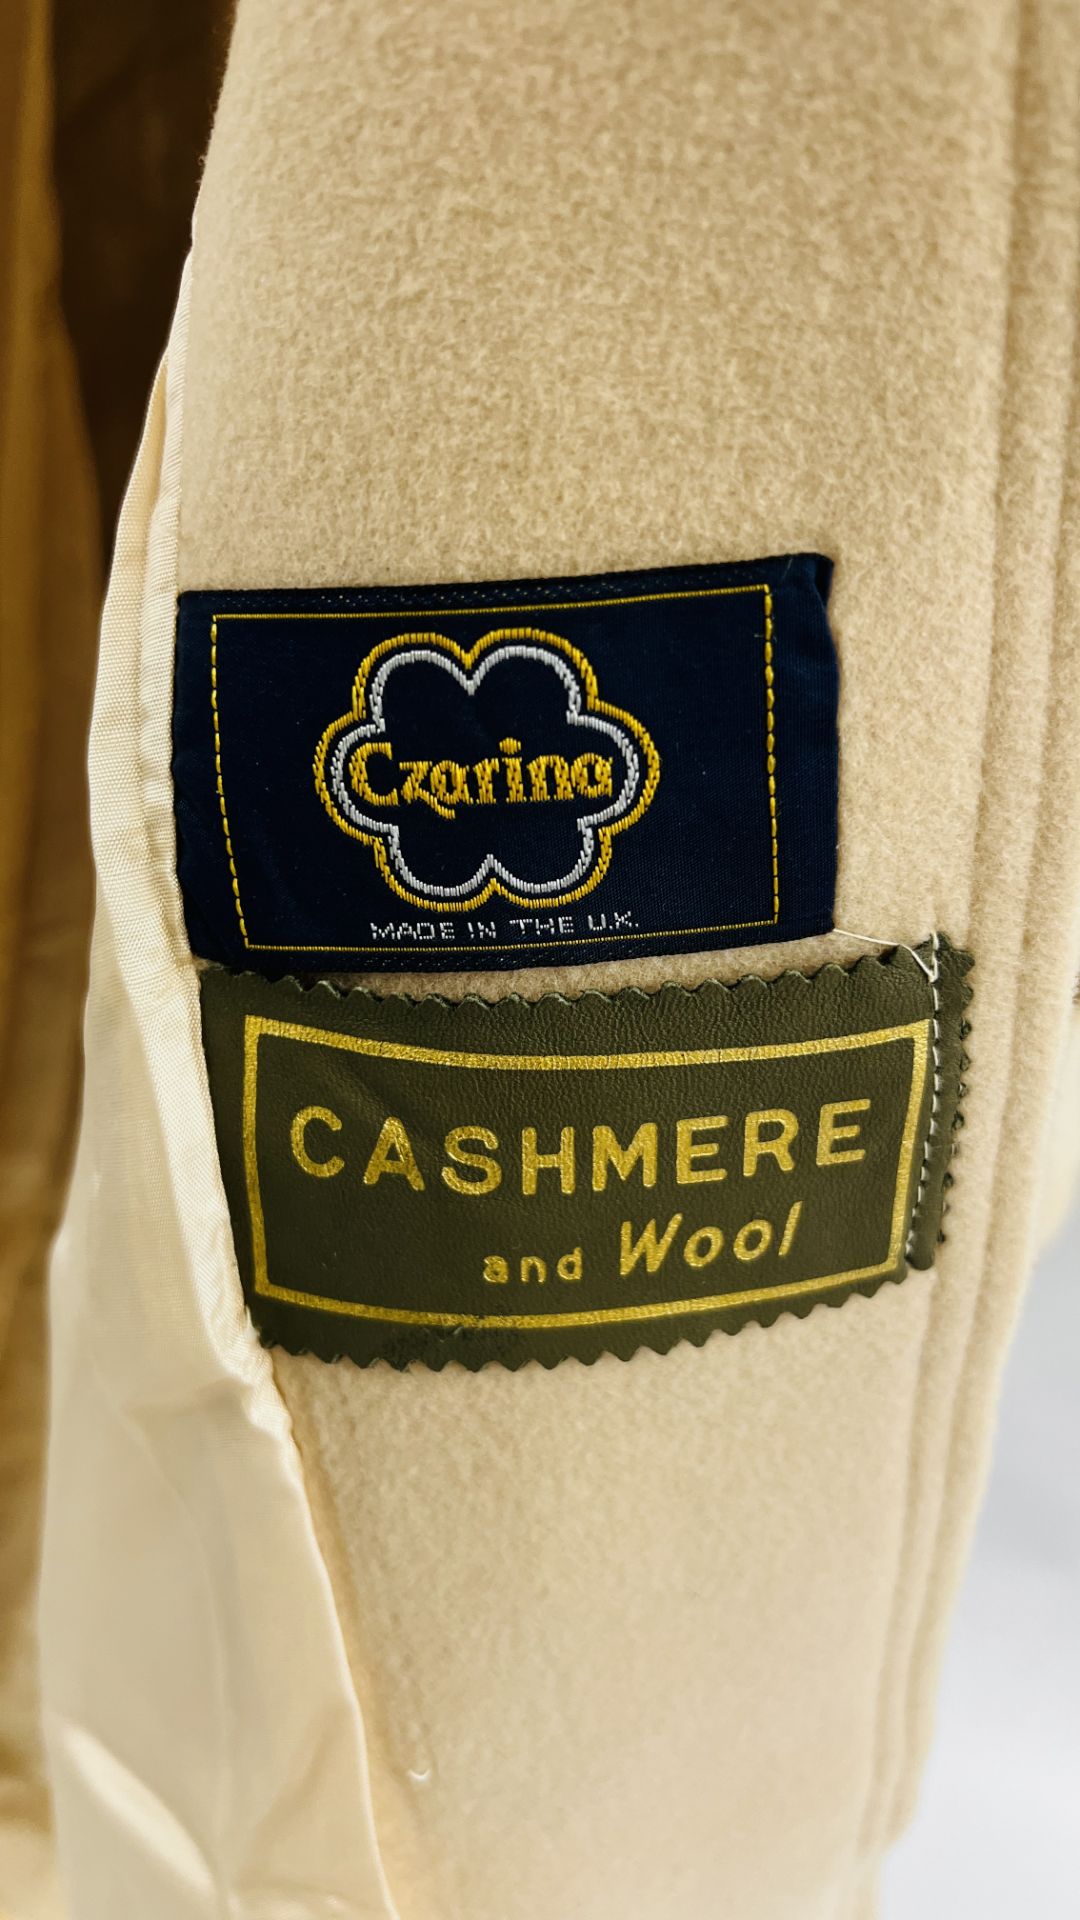 A LADIES CASHMERE AND WOOL COAT MARKED "CZARINA" (SIZE NOT SPECIFIED). - Image 5 of 6